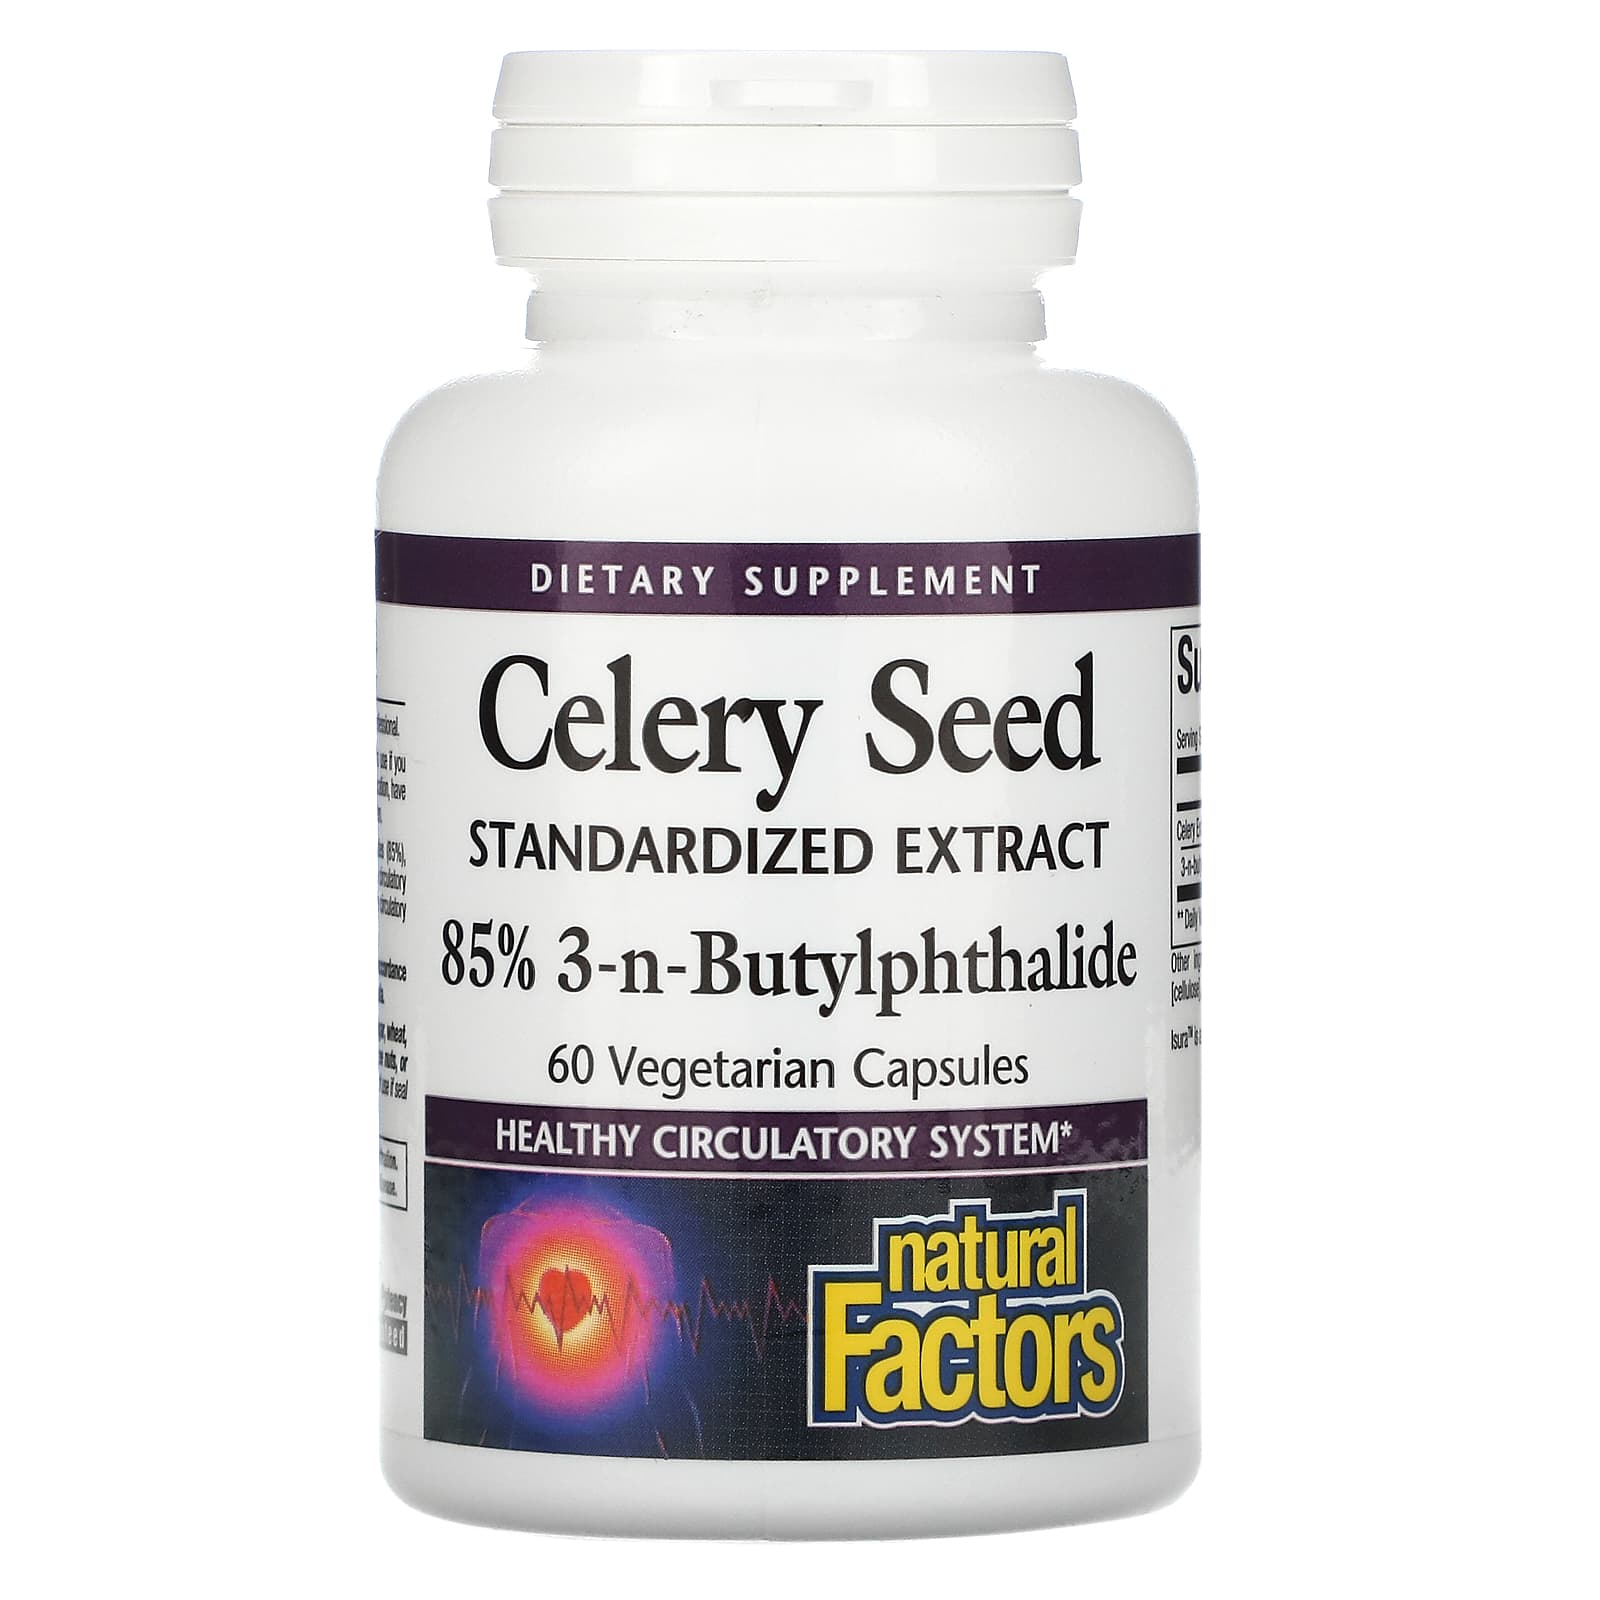 Natural Factors Celery Seed, Standardized Extract, 60 Vegetarian Capsules